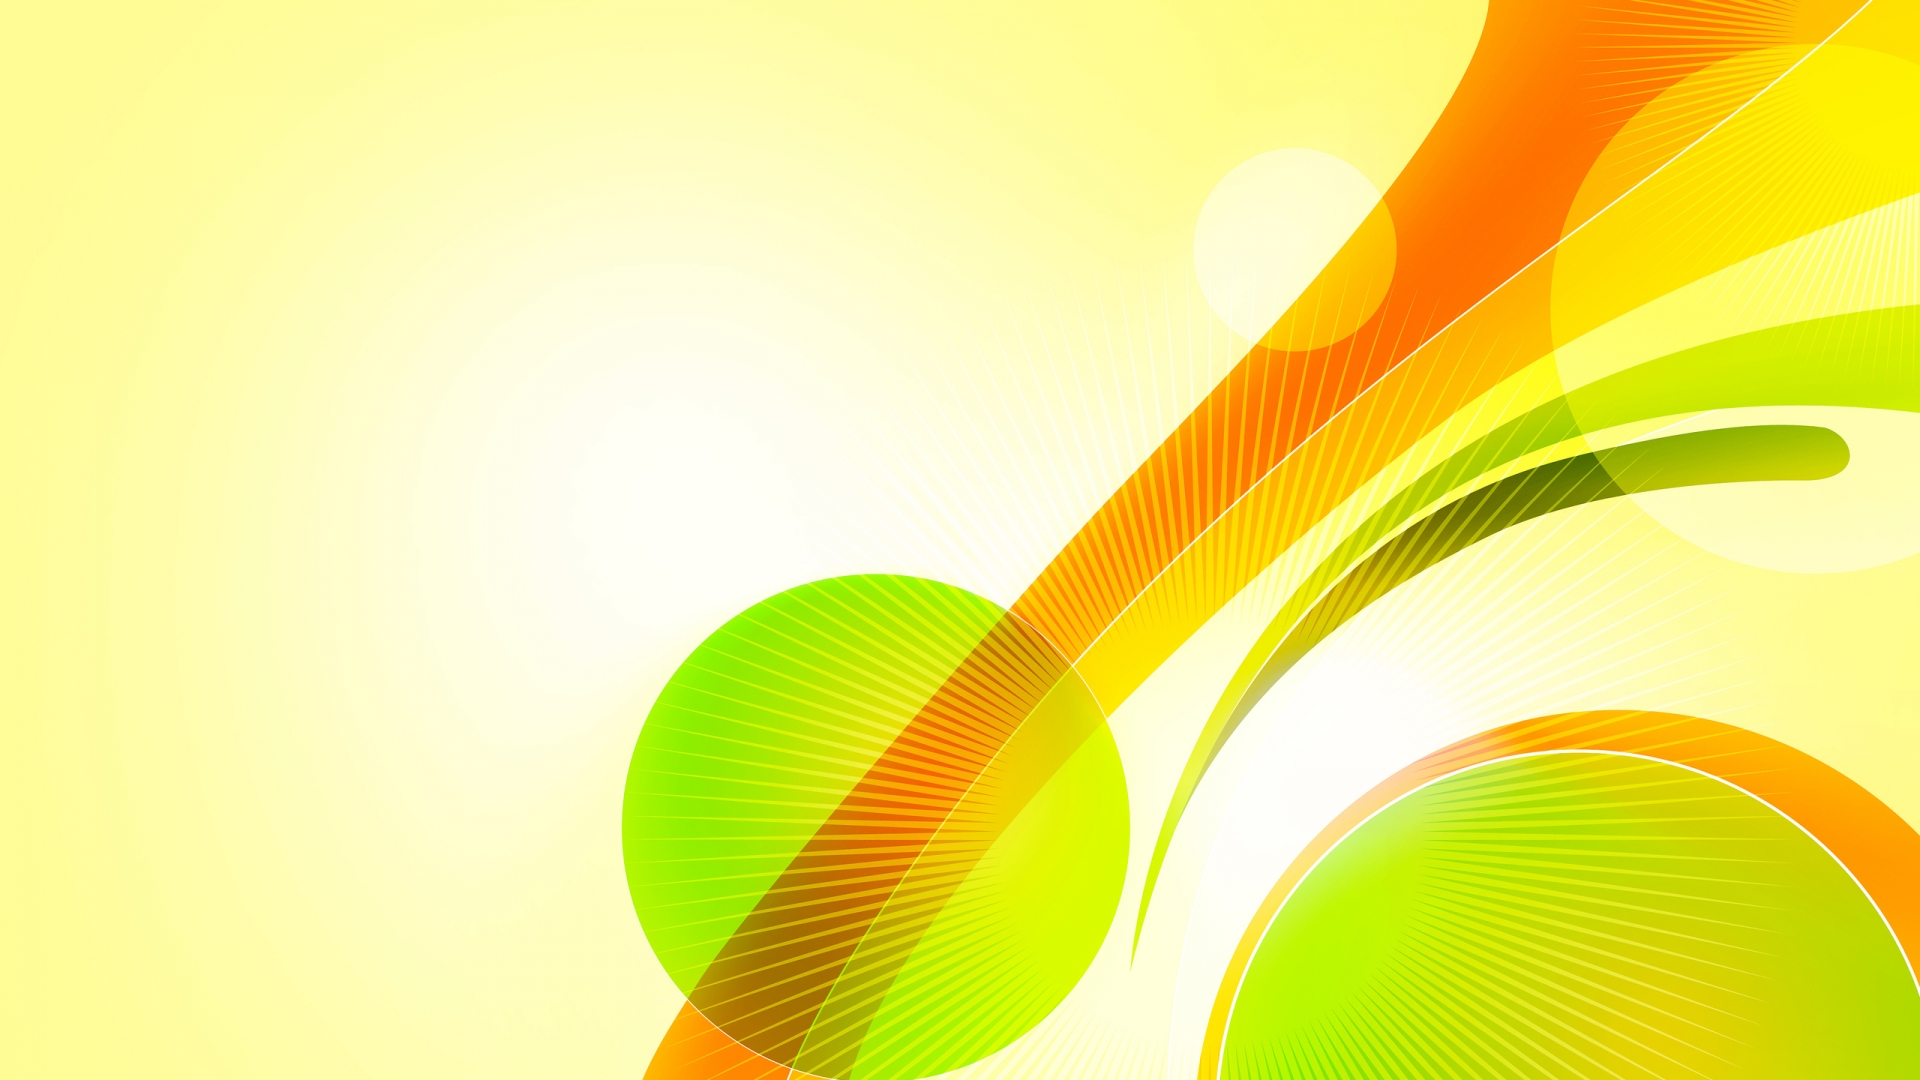 Great Colourful Abstract for 1920 x 1080 HDTV 1080p resolution